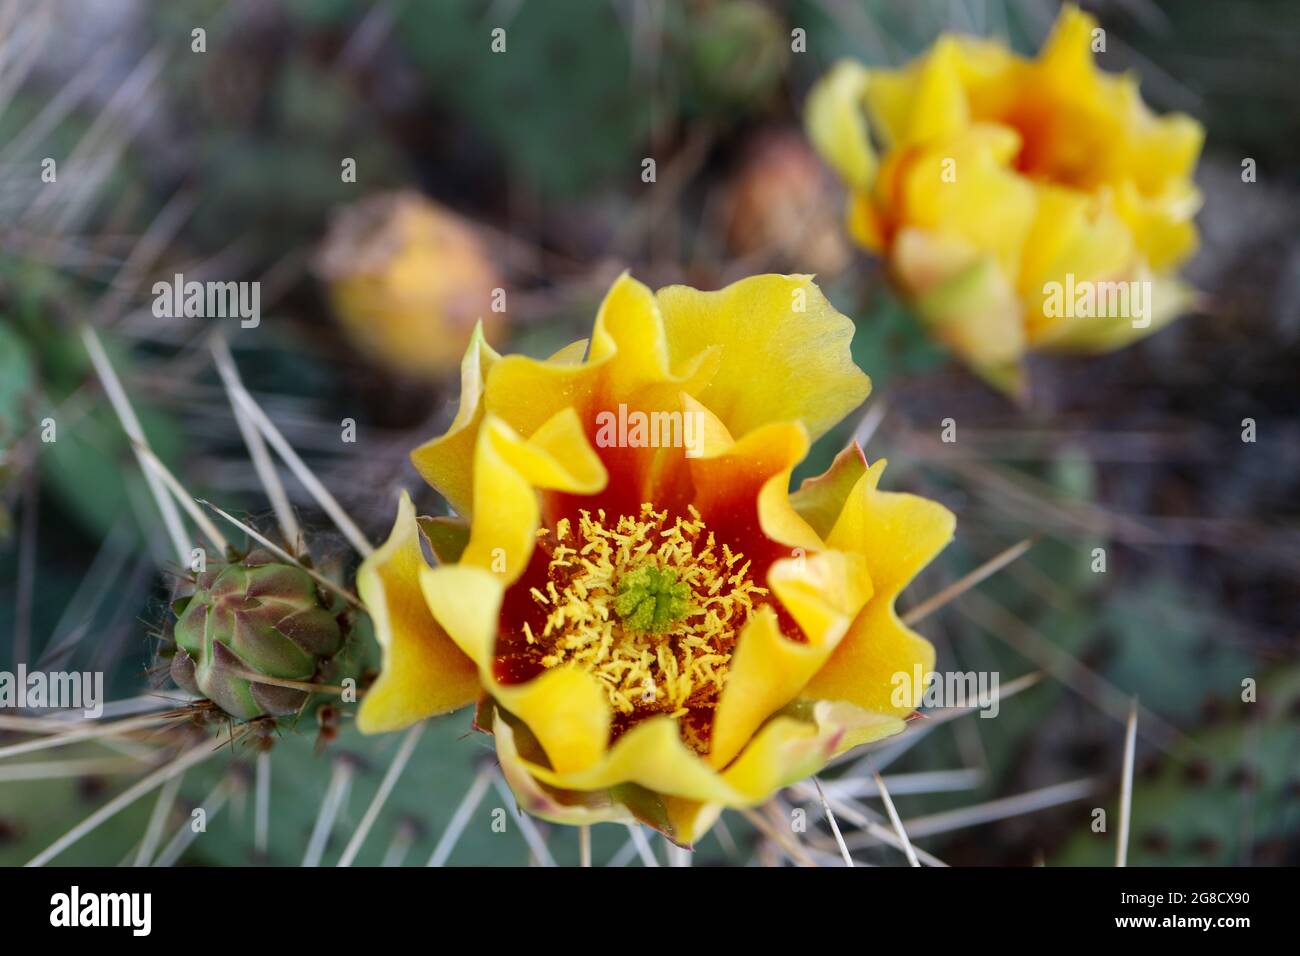 Cactus flower with delicate petals and buds, cactus flower with yellow - red petals and white stamens, cactus with thorns, beauty in nature, floral Stock Photo